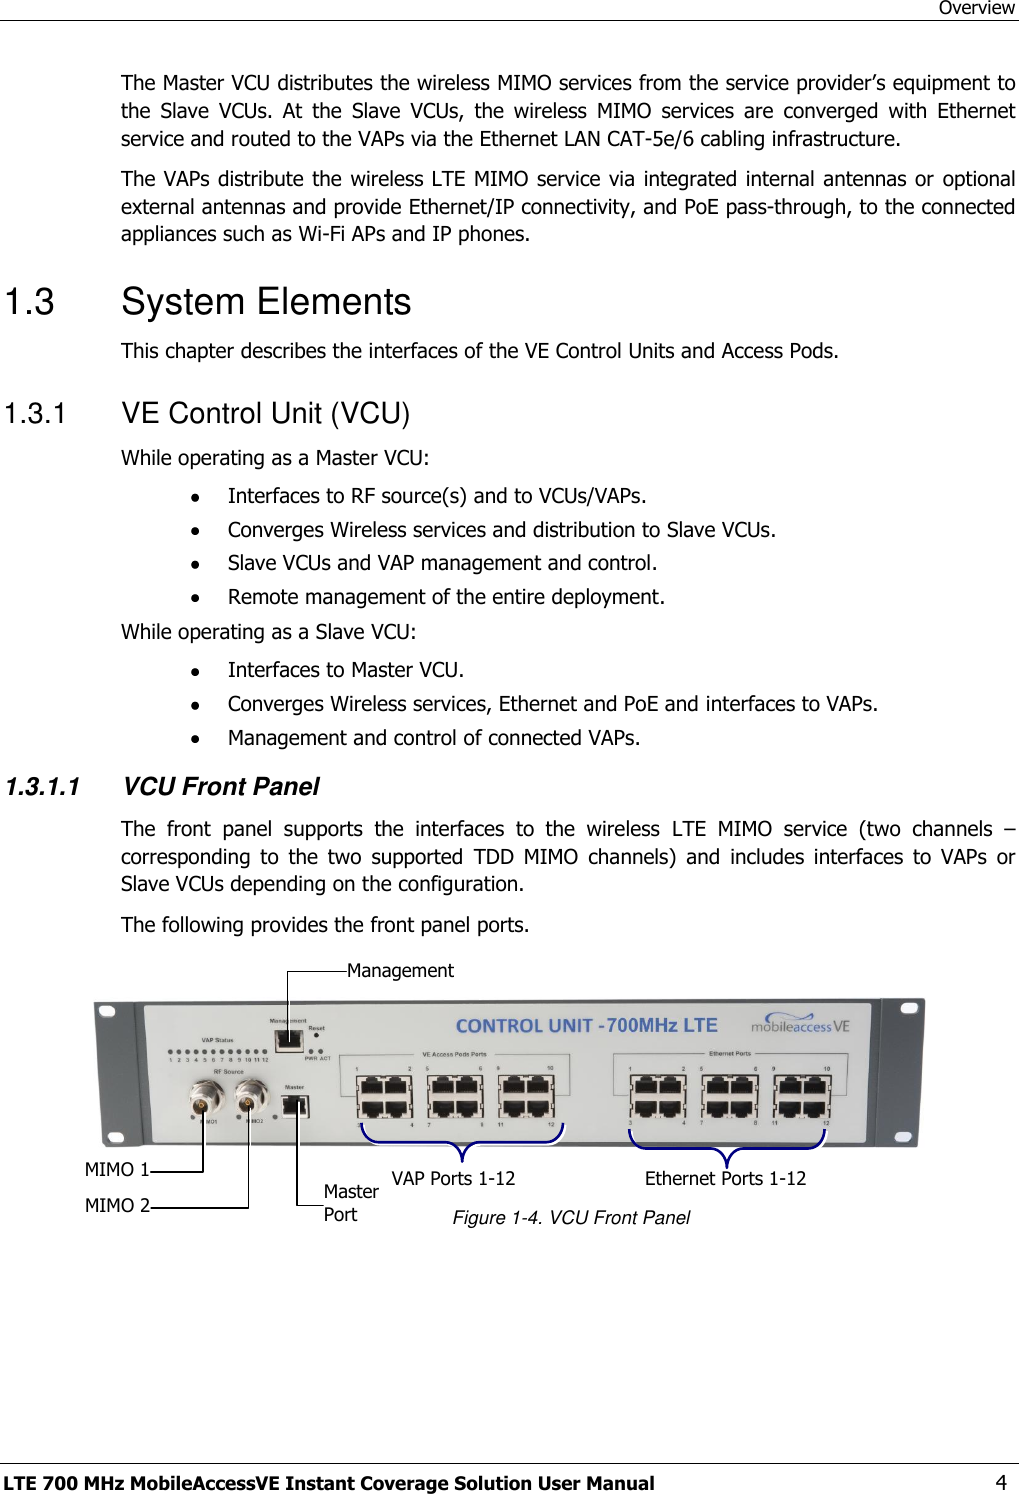 Overview LTE 700 MHz MobileAccessVE Instant Coverage Solution User Manual  4 The Master VCU distributes the wireless MIMO services from the service provider’s equipment to the  Slave  VCUs.  At  the  Slave  VCUs,  the  wireless  MIMO  services  are  converged  with  Ethernet service and routed to the VAPs via the Ethernet LAN CAT-5e/6 cabling infrastructure. The VAPs distribute the  wireless LTE MIMO  service via integrated internal antennas or  optional external antennas and provide Ethernet/IP connectivity, and PoE pass-through, to the connected appliances such as Wi-Fi APs and IP phones. 1.3  System Elements This chapter describes the interfaces of the VE Control Units and Access Pods.  1.3.1  VE Control Unit (VCU) While operating as a Master VCU:  Interfaces to RF source(s) and to VCUs/VAPs.  Converges Wireless services and distribution to Slave VCUs.  Slave VCUs and VAP management and control.  Remote management of the entire deployment. While operating as a Slave VCU:  Interfaces to Master VCU.  Converges Wireless services, Ethernet and PoE and interfaces to VAPs.  Management and control of connected VAPs. 1.3.1.1 VCU Front Panel The  front  panel  supports  the  interfaces  to  the  wireless  LTE  MIMO  service  (two  channels  – corresponding  to  the  two  supported  TDD  MIMO  channels)  and  includes  interfaces  to  VAPs  or Slave VCUs depending on the configuration. The following provides the front panel ports.        Figure 1-4. VCU Front Panel Ethernet Ports 1-12 VAP Ports 1-12 Management  MIMO 2   MIMO 1   Master Port   